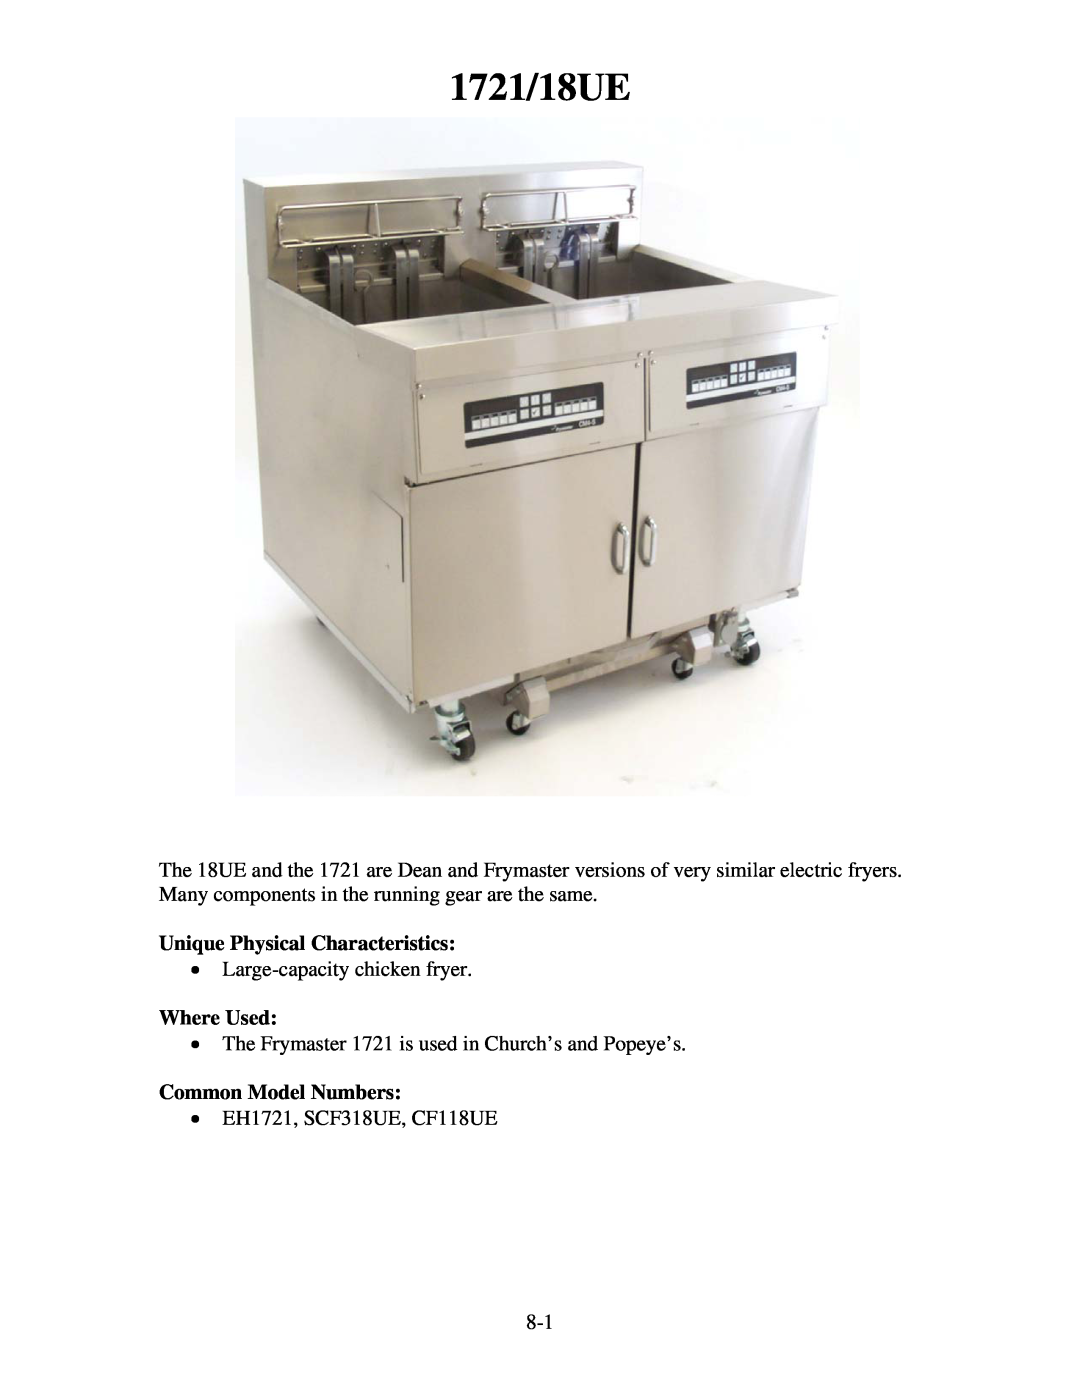 Frymaster H55 1721/18UE, Large-capacity chicken fryer, The Frymaster 1721 is used in Church’s and Popeye’s, Where Used 